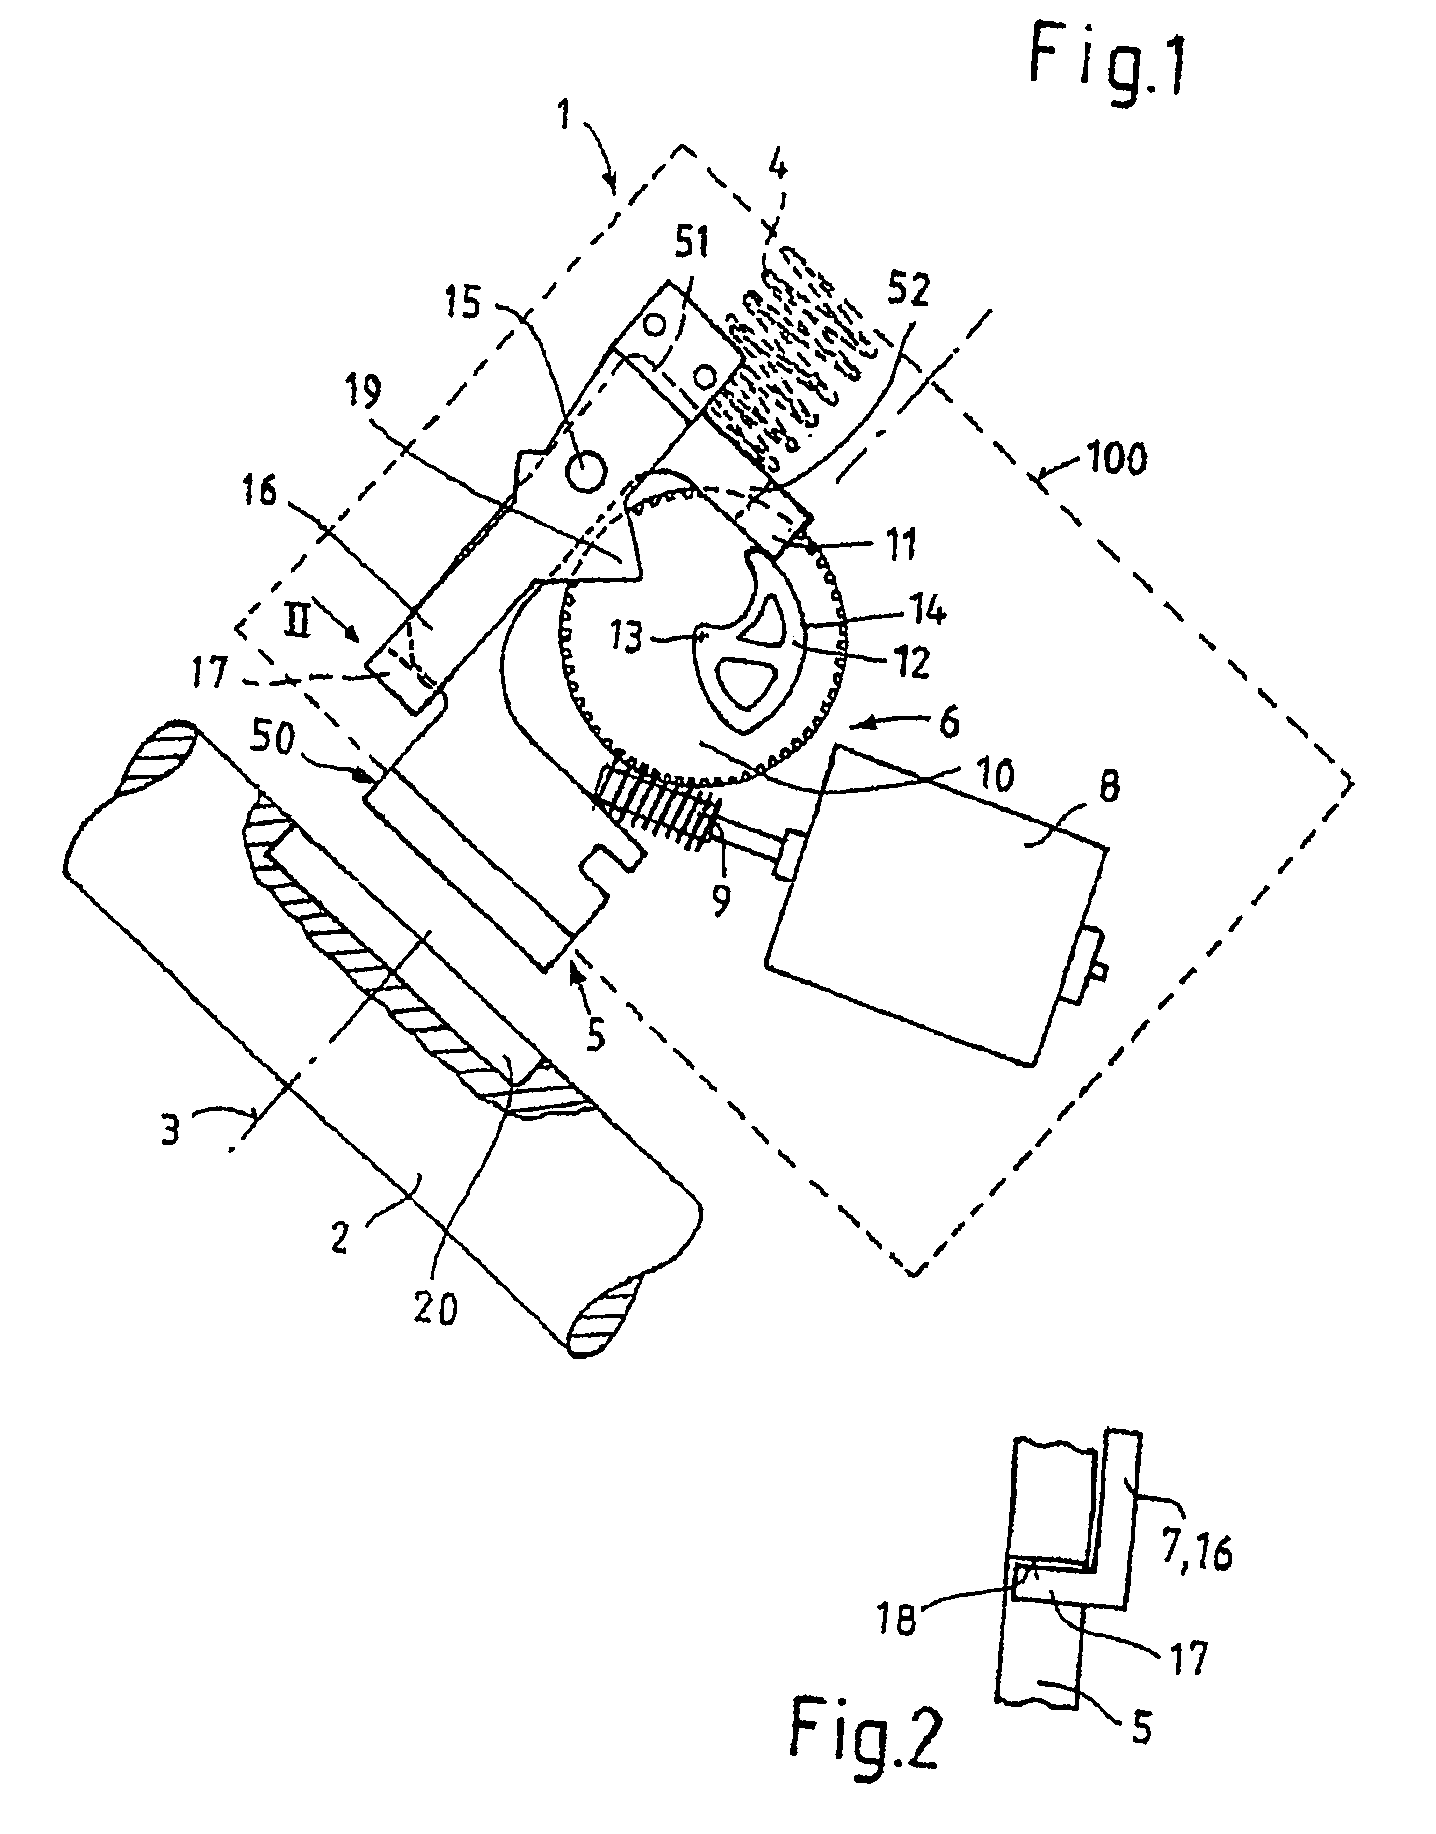 Safe gear box for electrical steering column lock